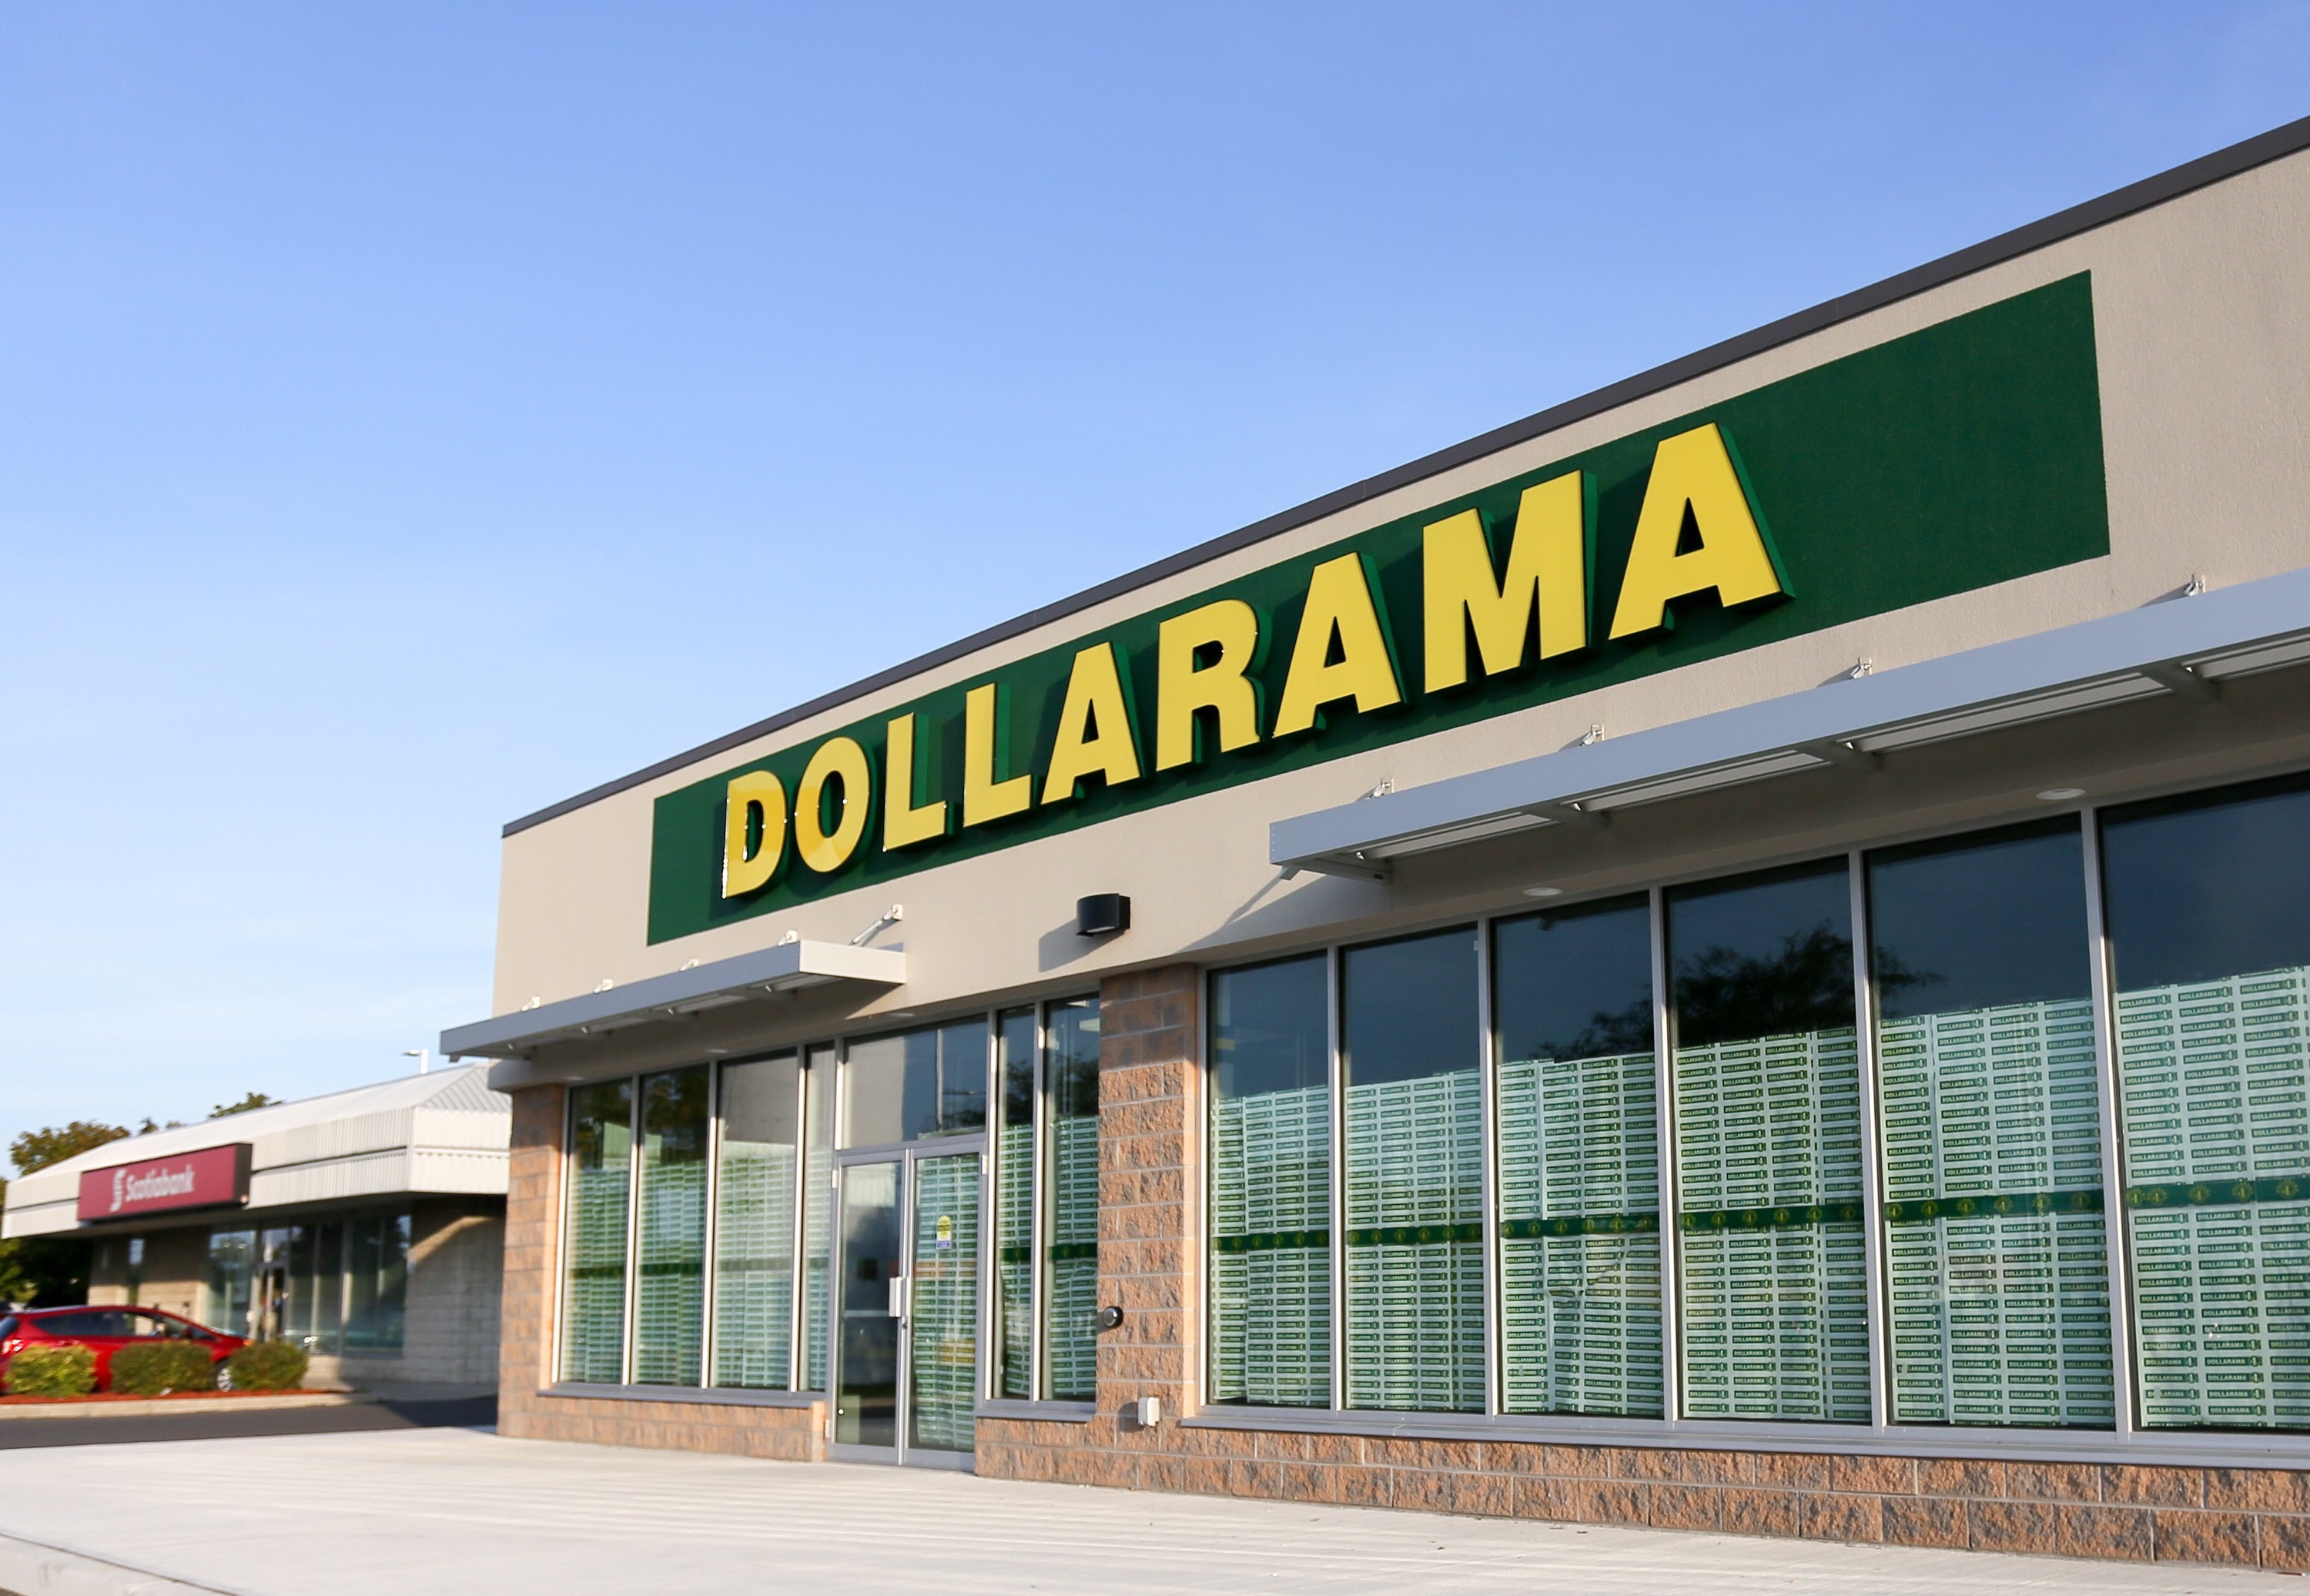 How do you apply for jobs at Dollarama?